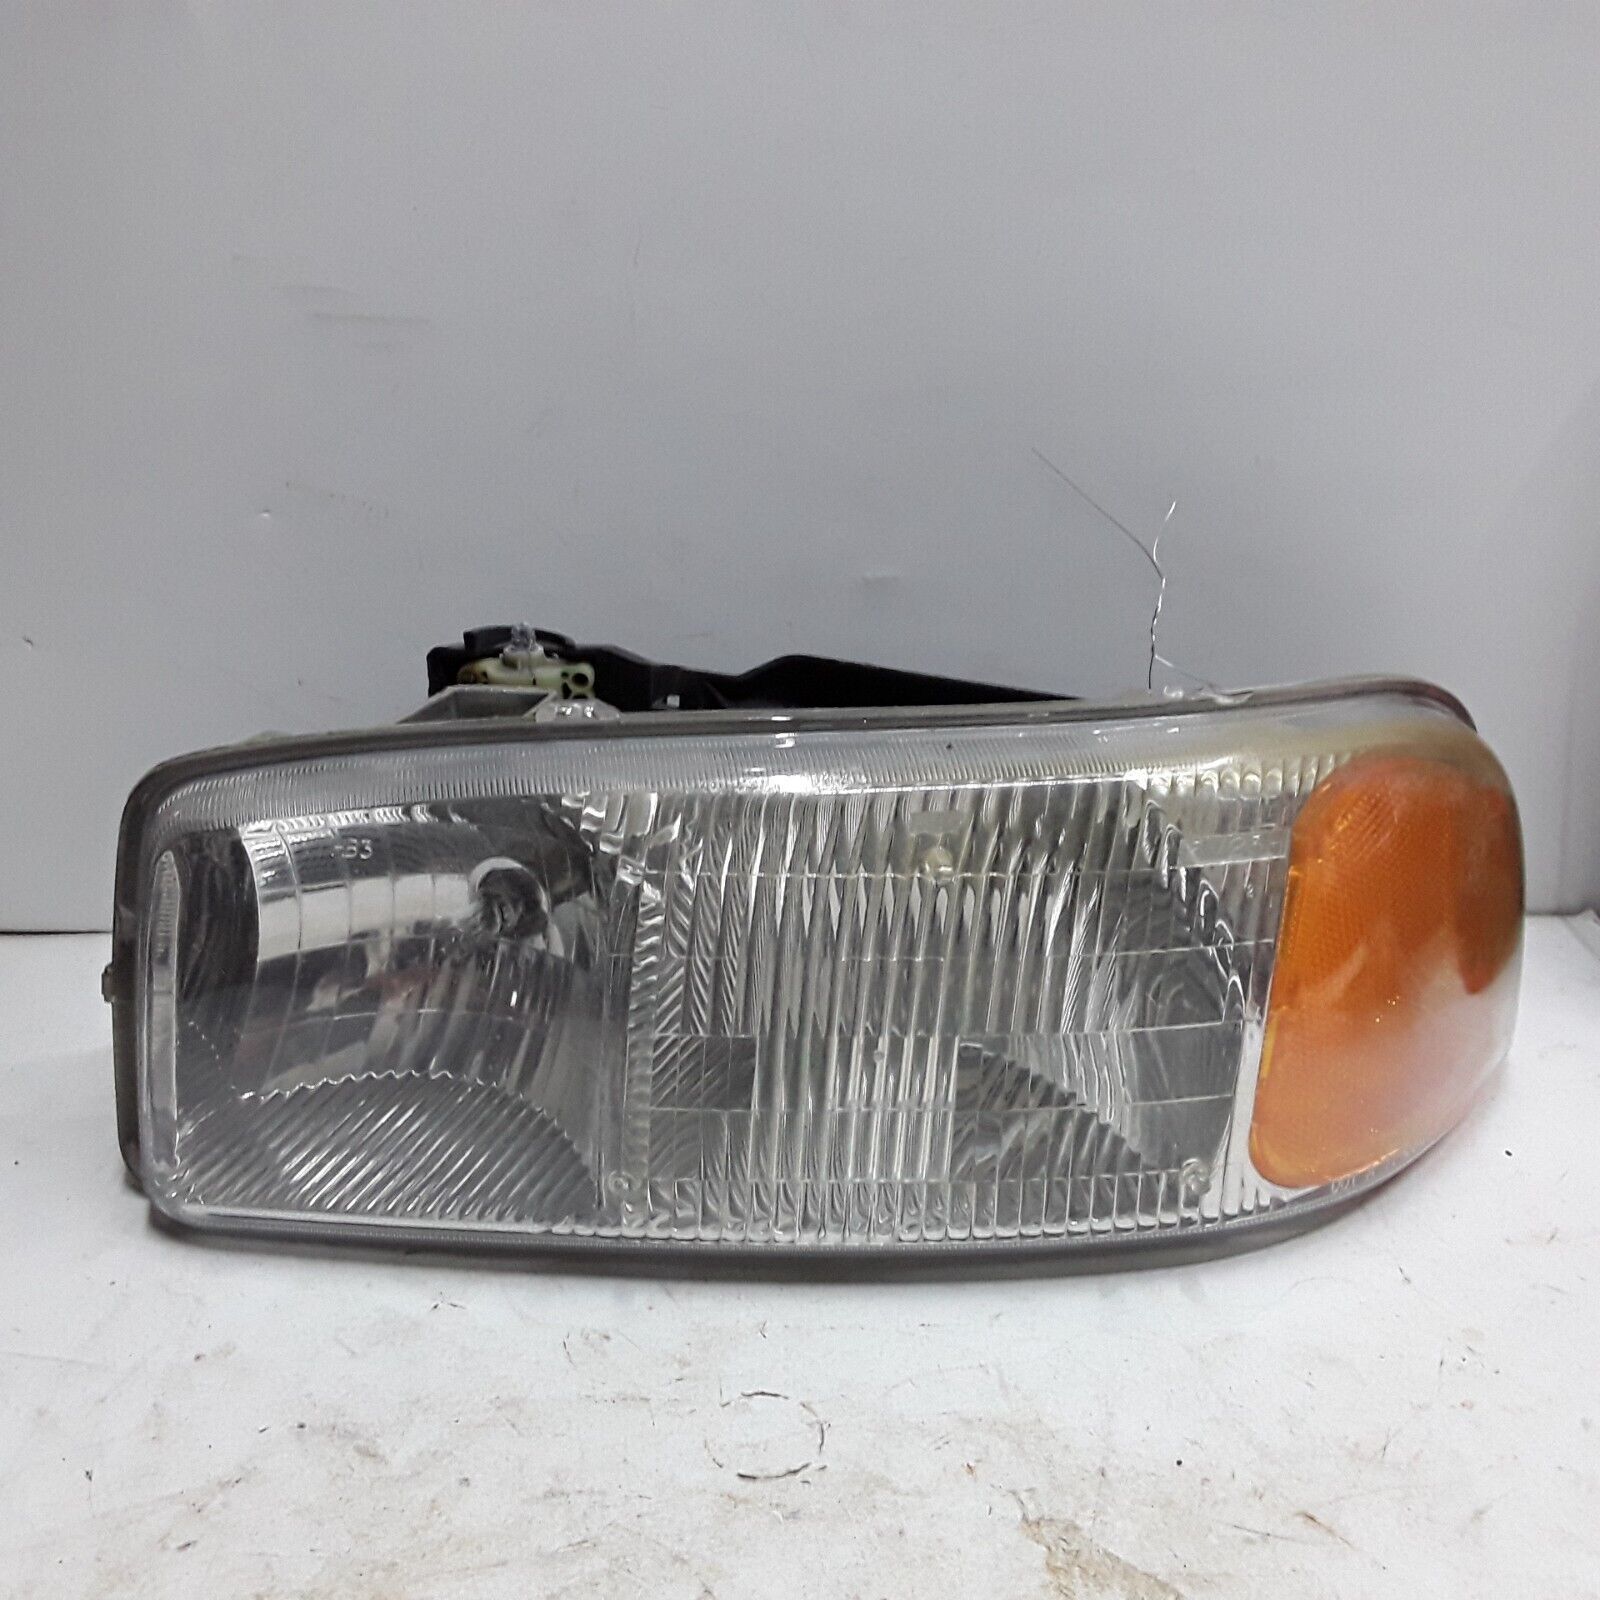 Primary image for 99 00 01 02 03 04 05 06 07 GMC Yukon left driver's headlight assembly OEM